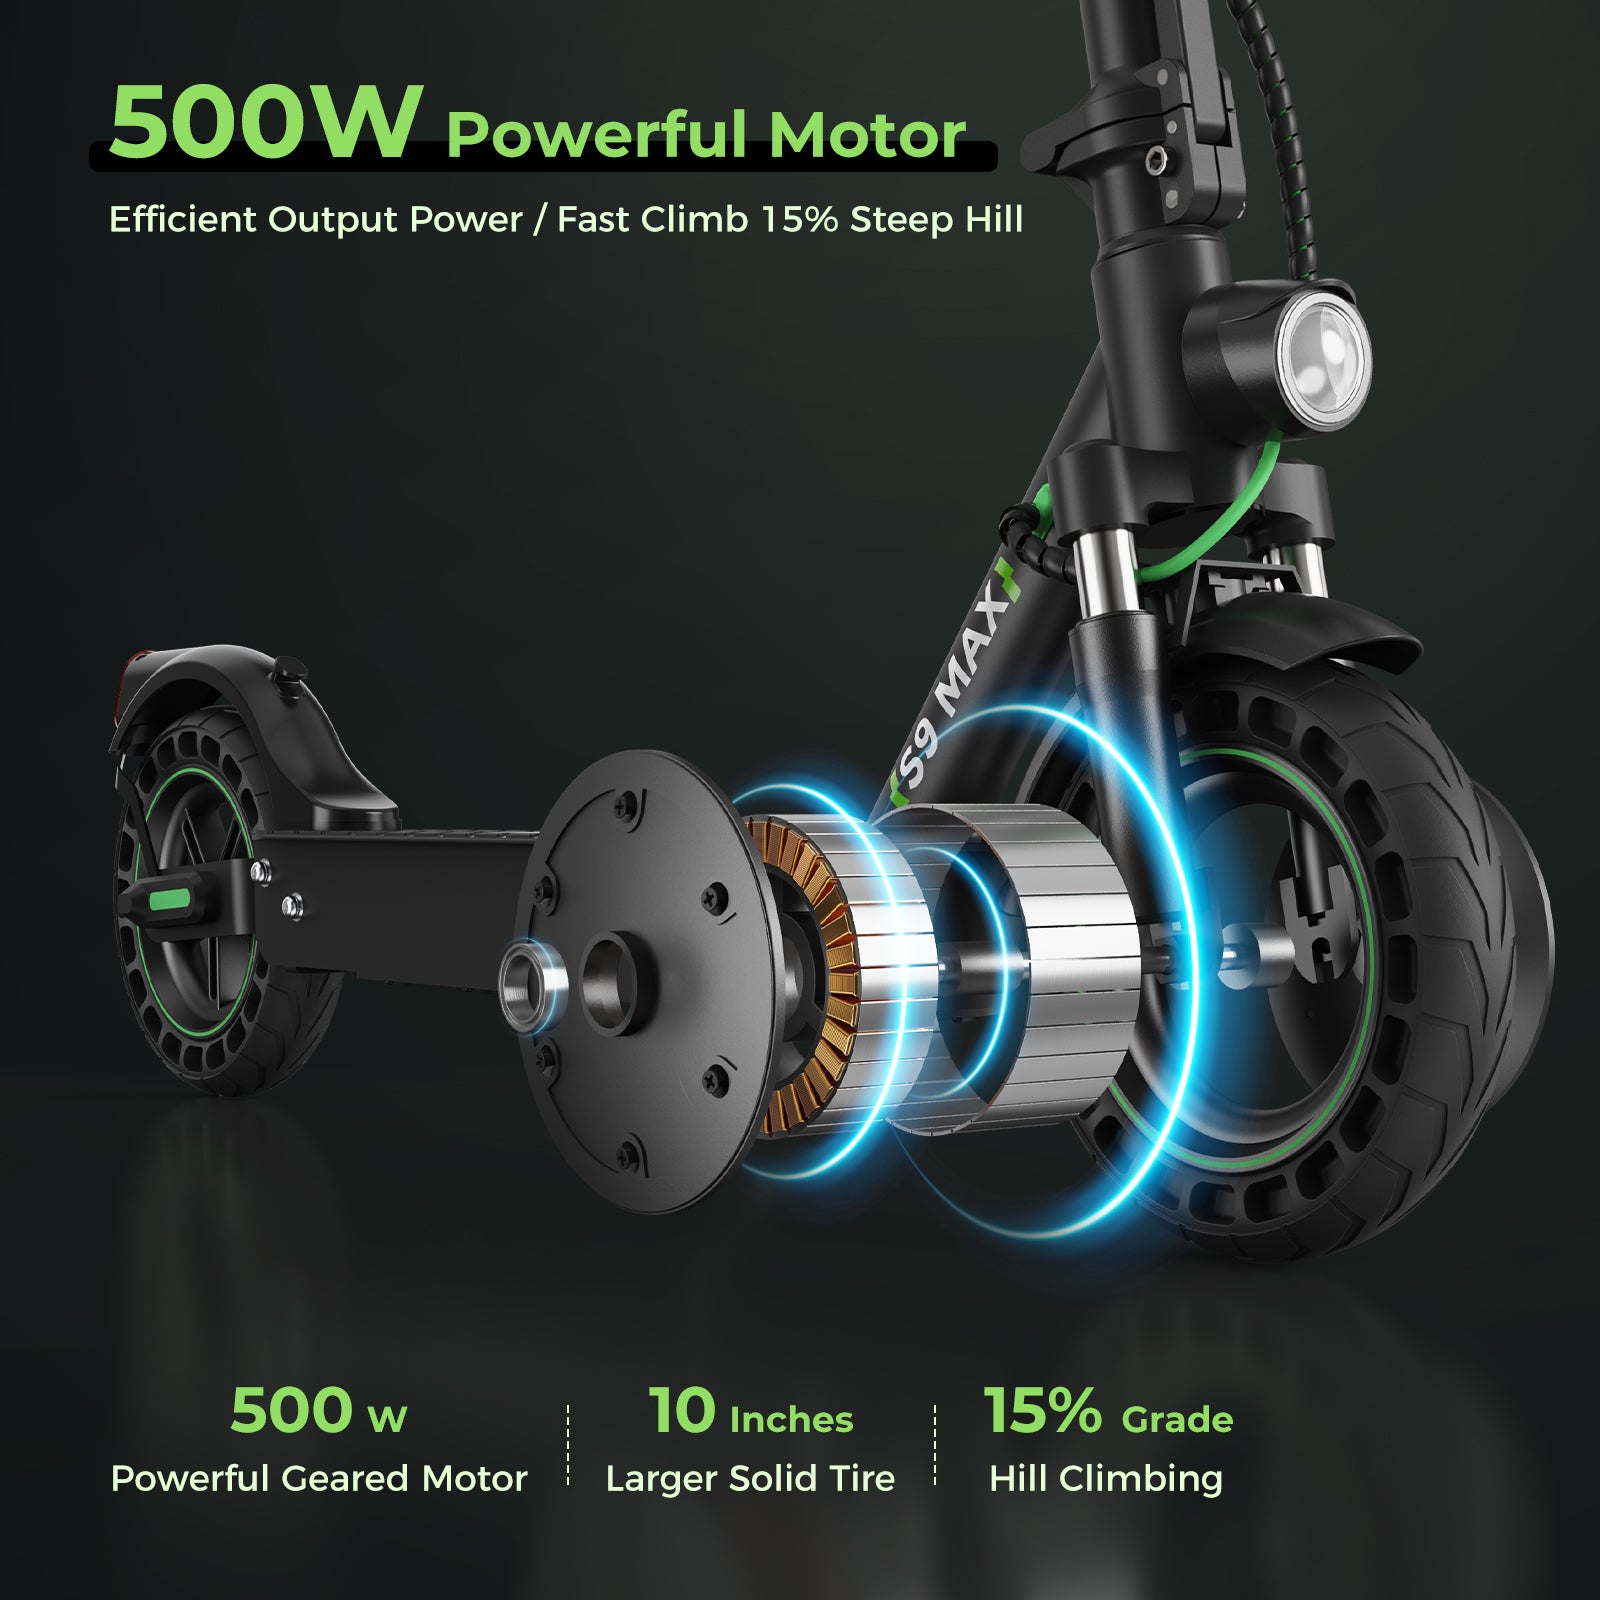 iSinwheel® S9Max 500W Upgraded Electric Scooter iSinwheel Official Store